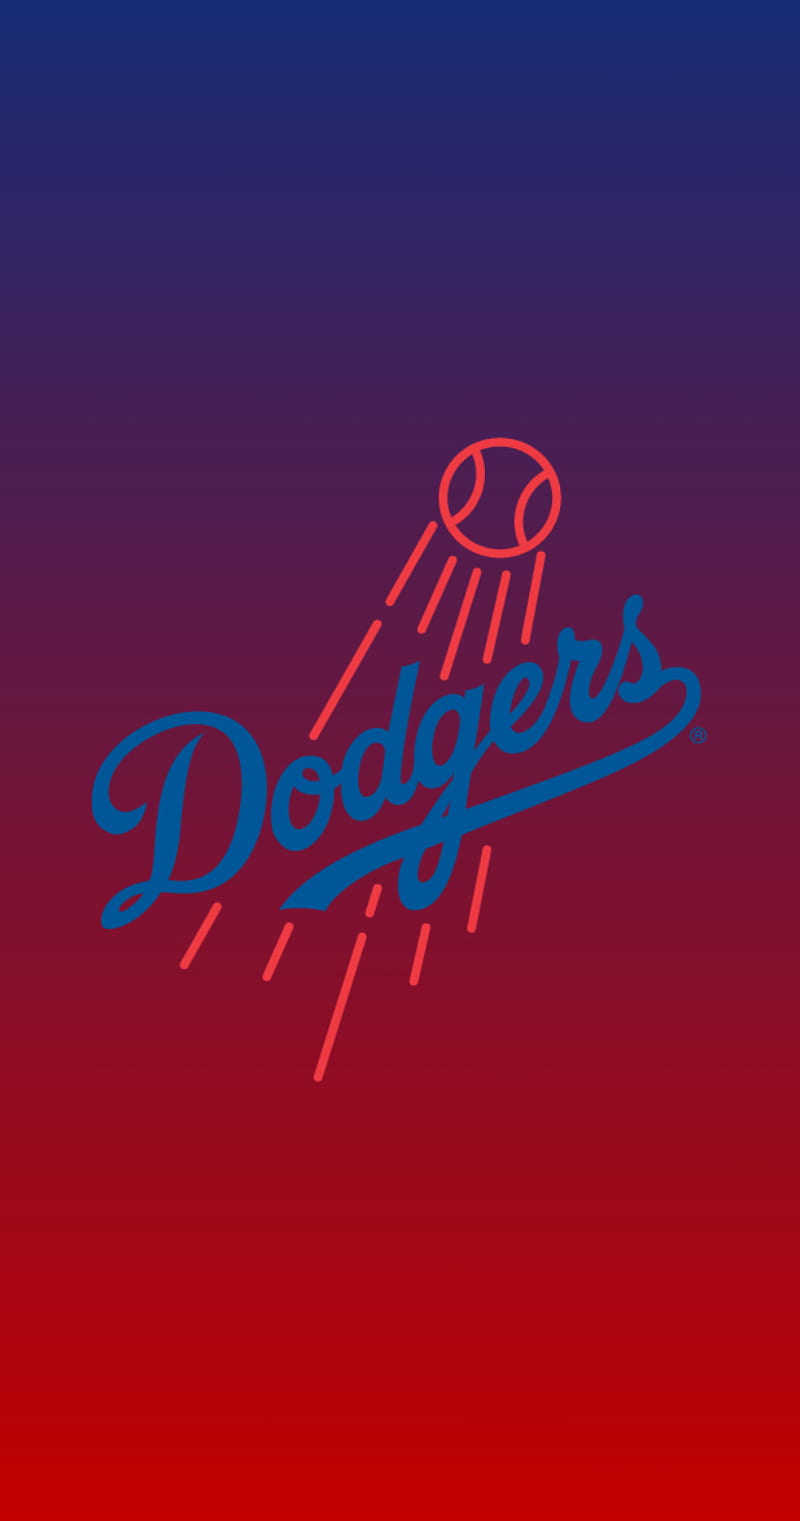 Los Angeles Dodgers iPhone Wallpaper 61 pictures